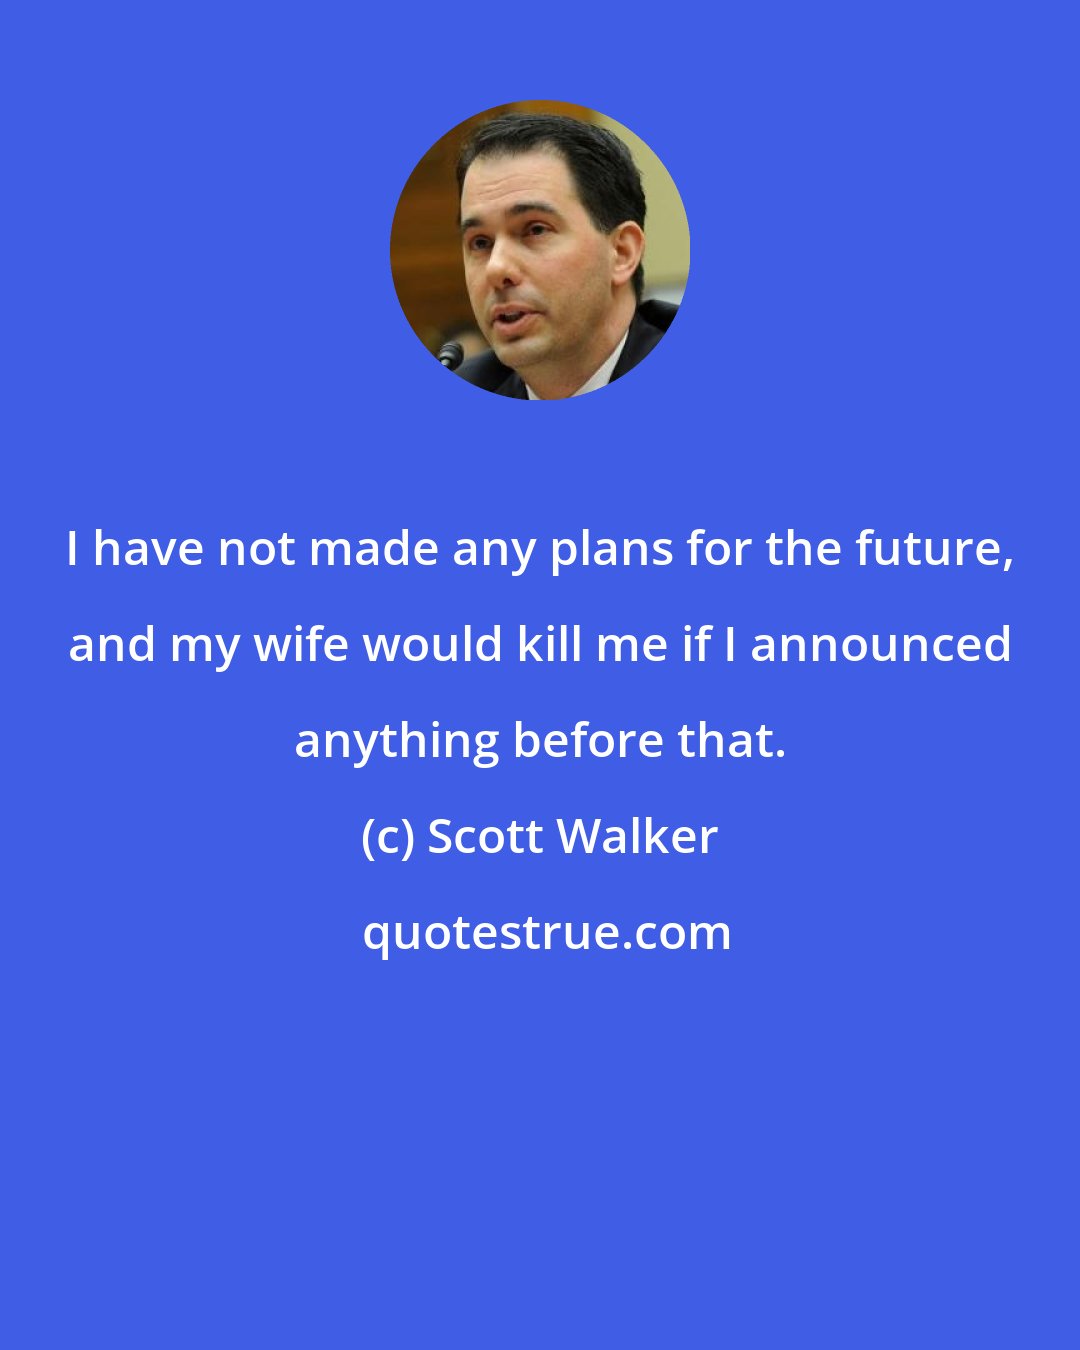 Scott Walker: I have not made any plans for the future, and my wife would kill me if I announced anything before that.